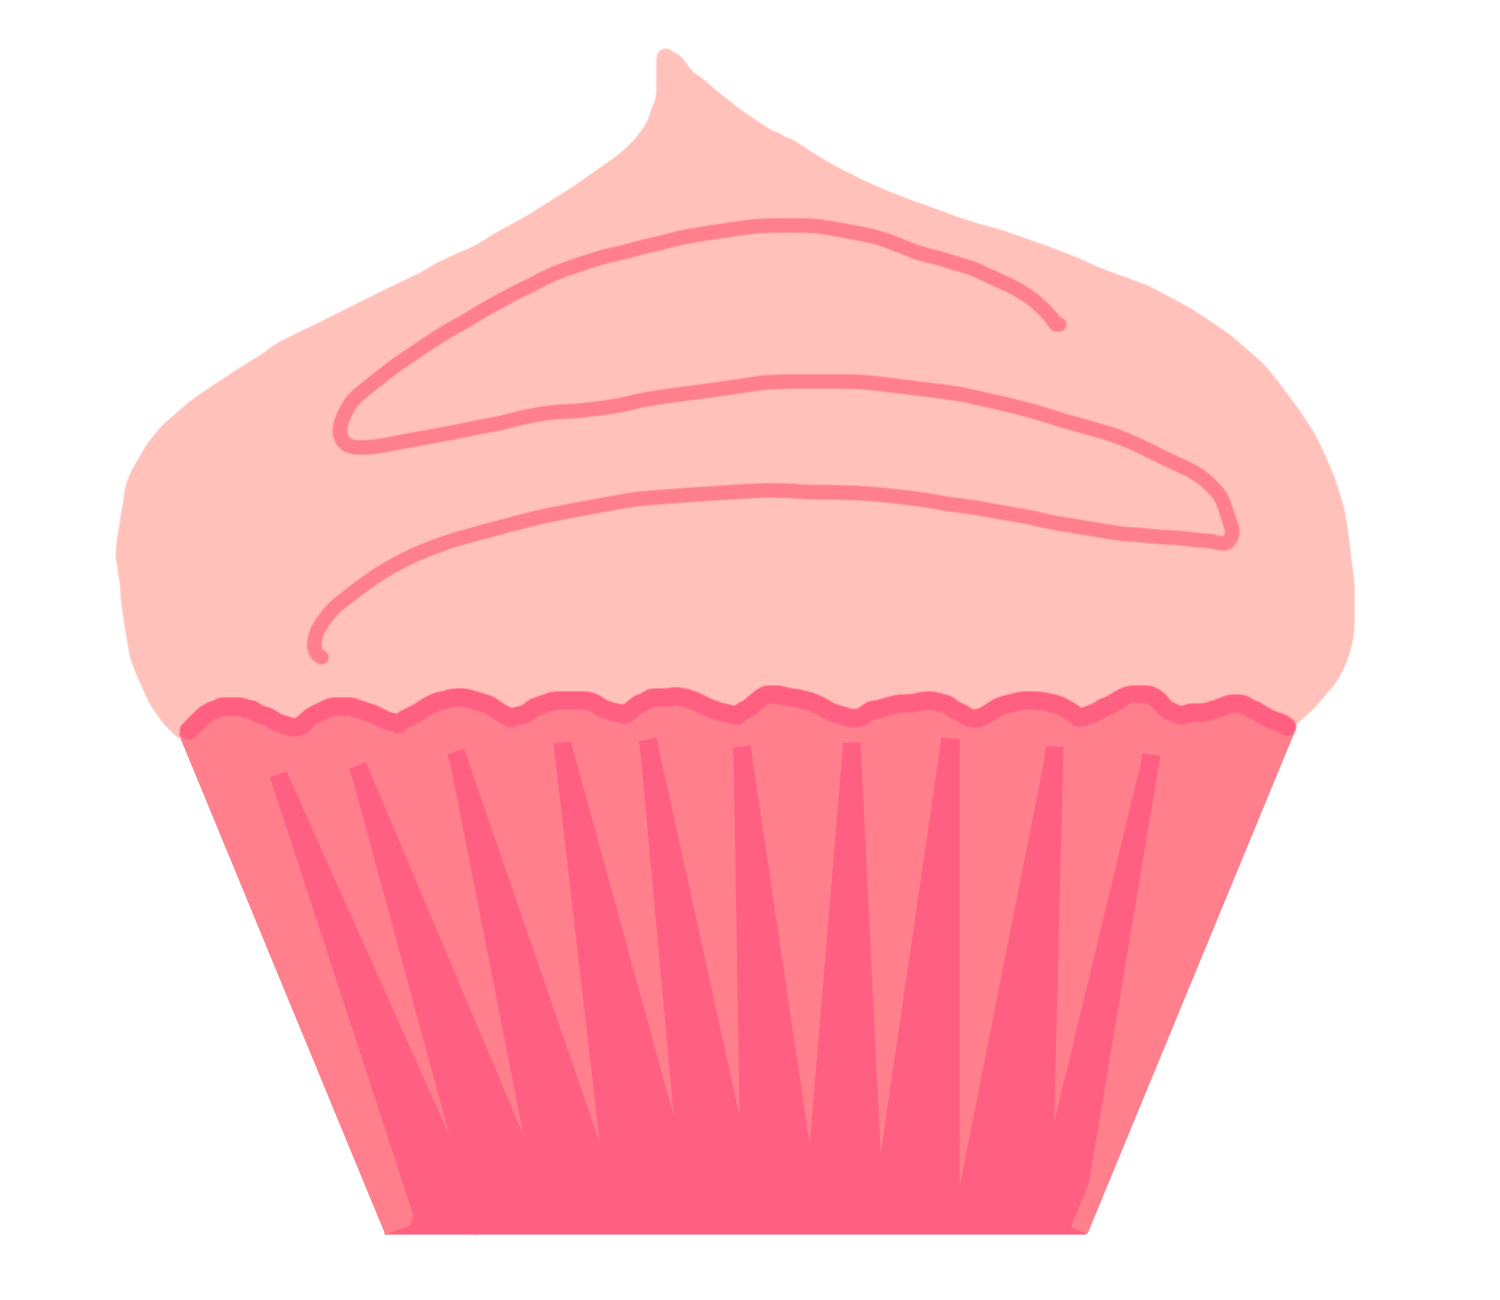 Cupcakes clipart border free clipart images 3 - dbclipart.com